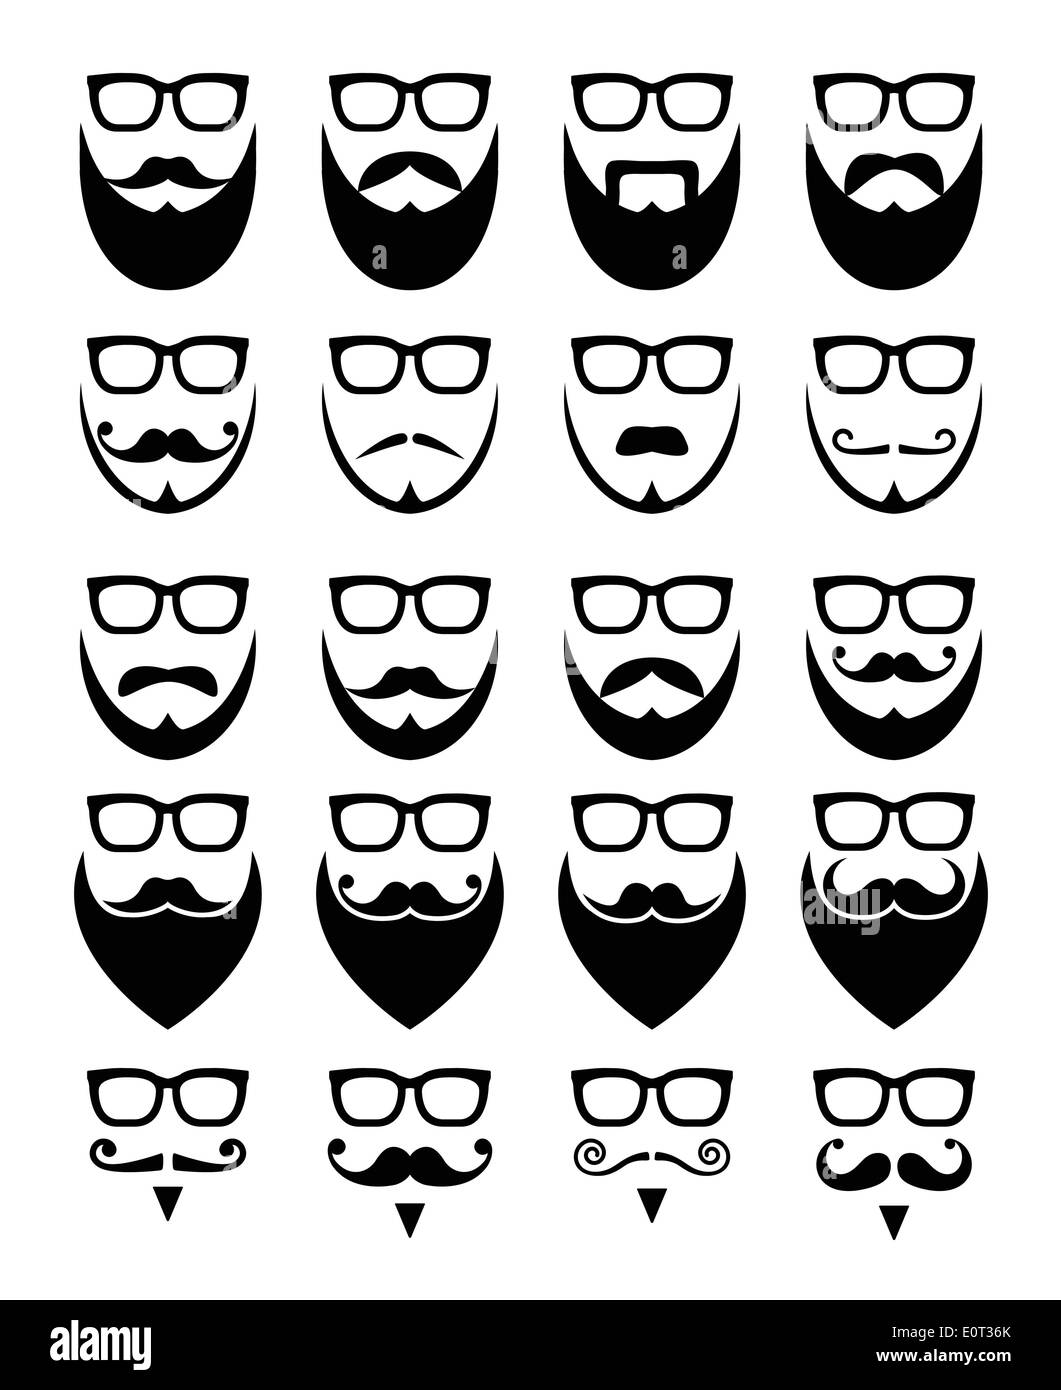 Beard and glasses, hipster icons set Stock Vector